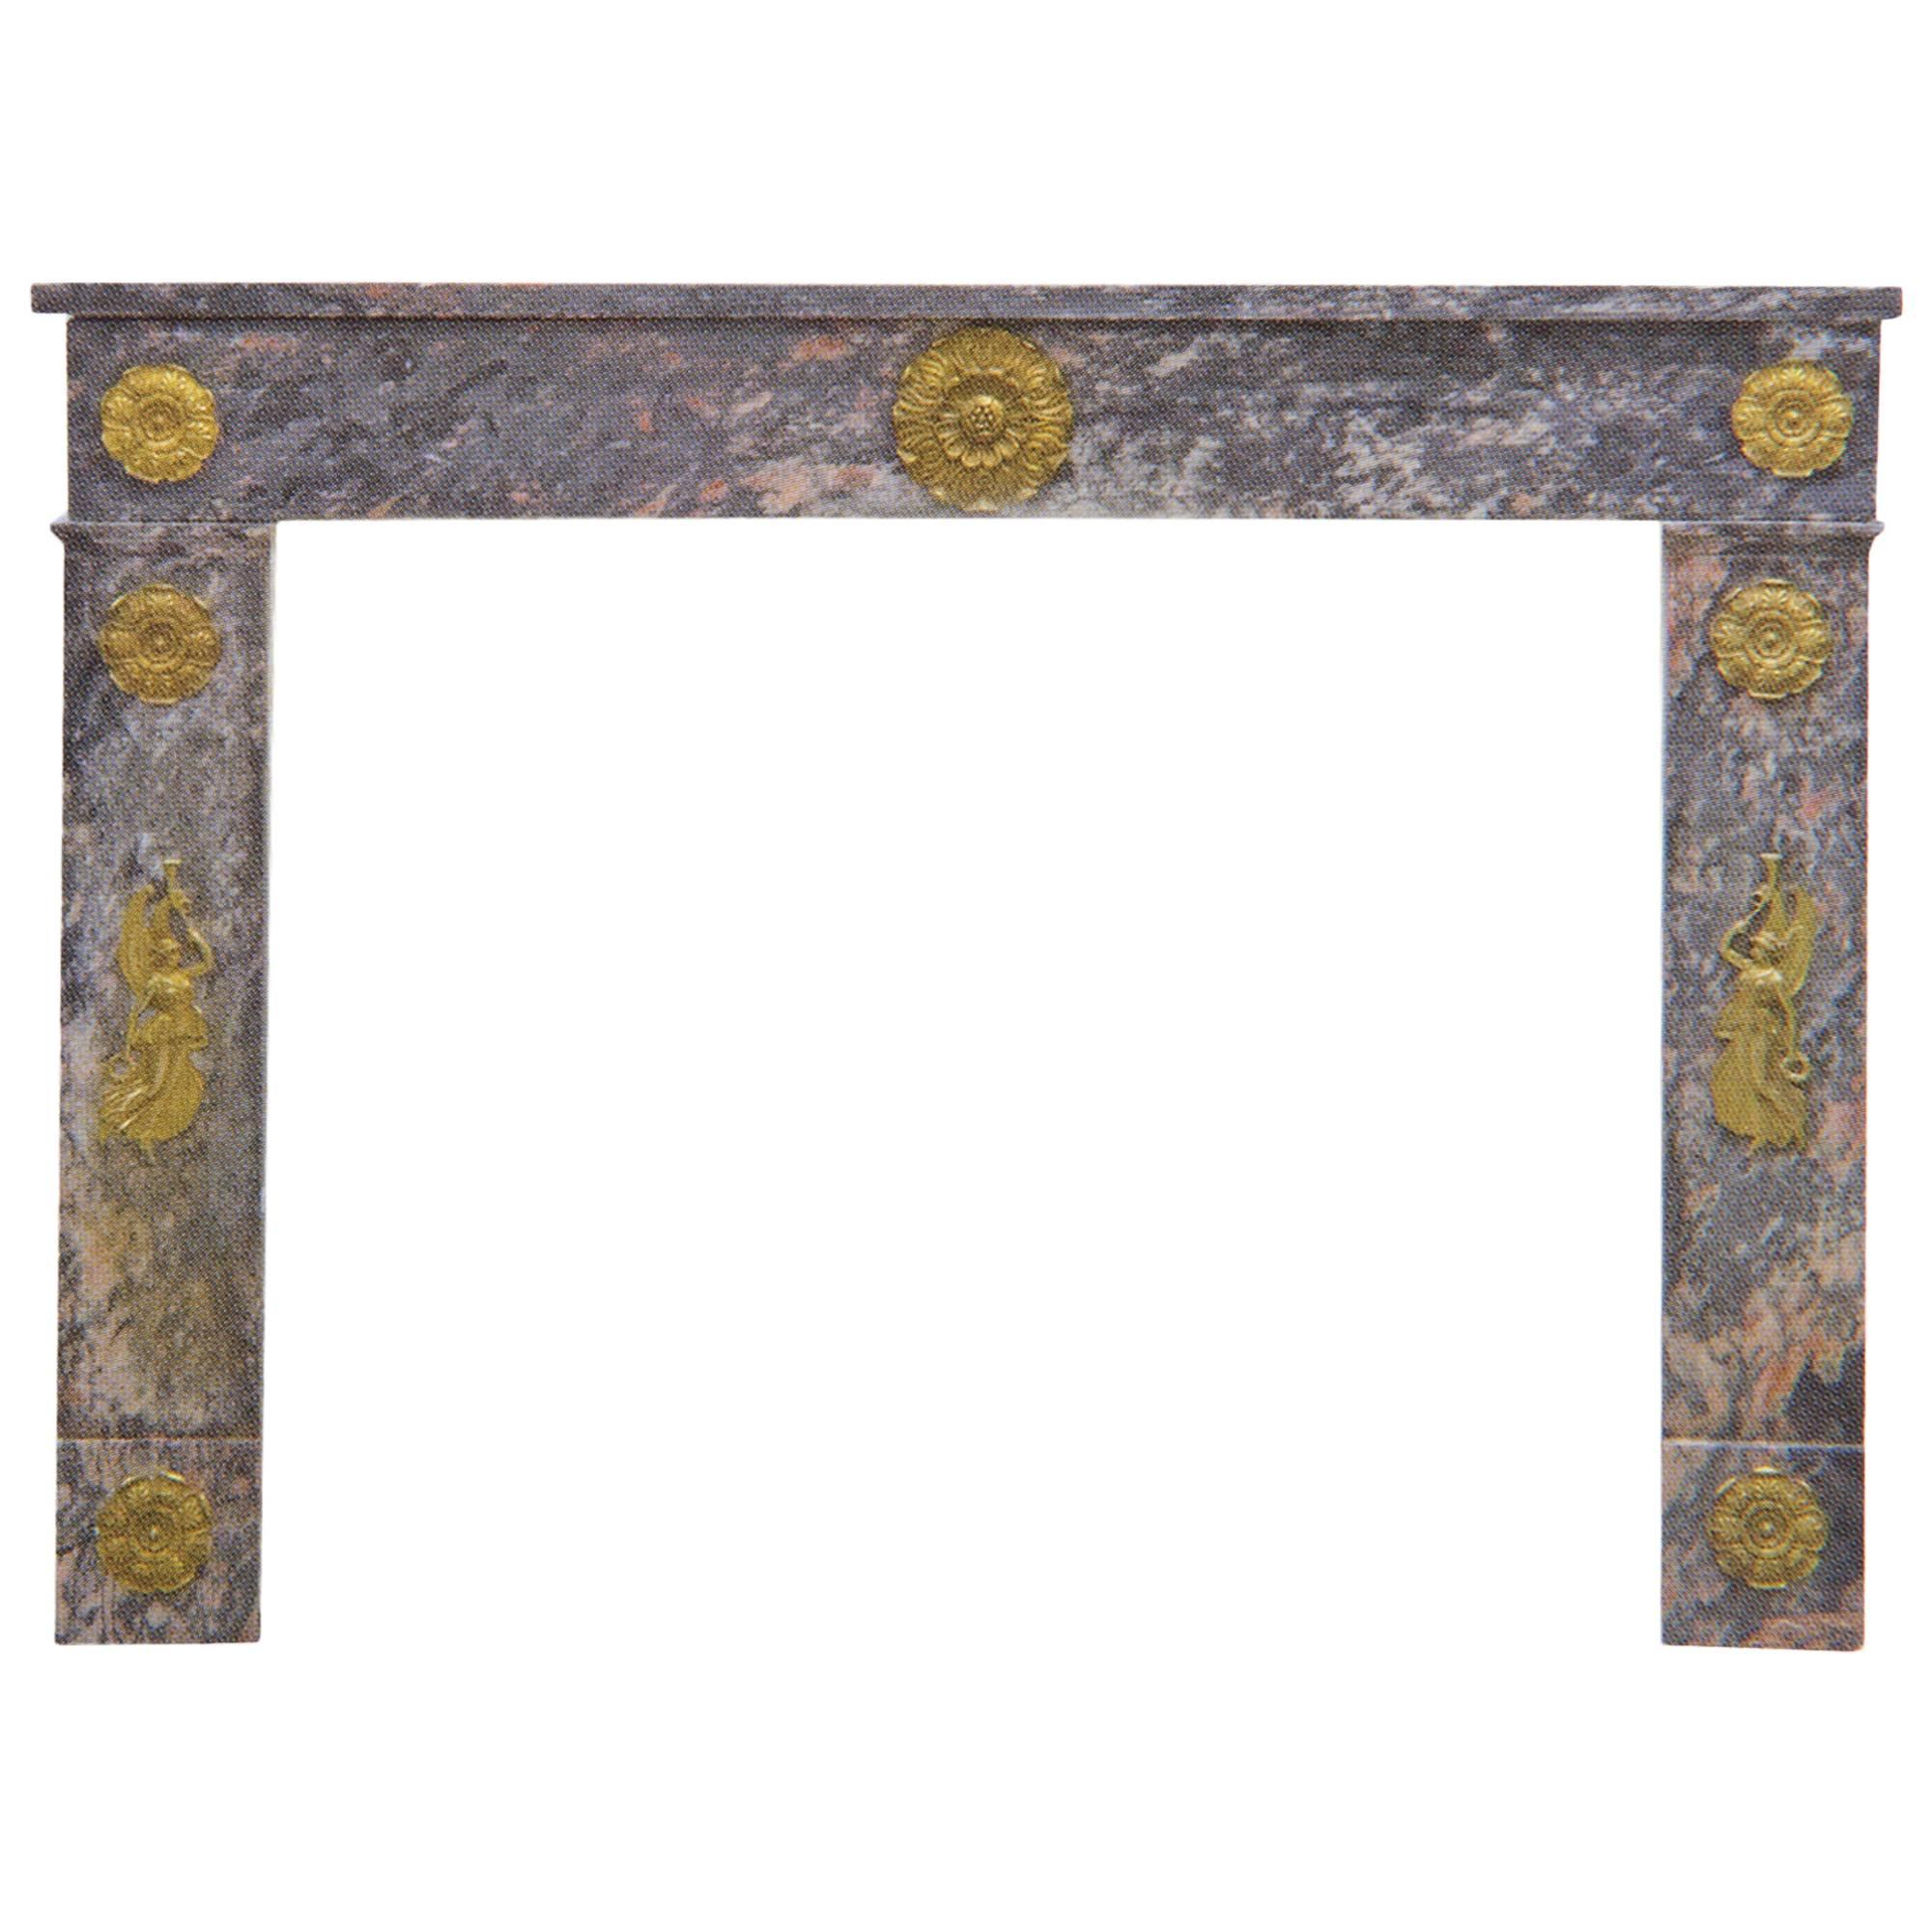   Marble Large Fireplace Mantel with Gilt Bronze Angels Friezes For Sale